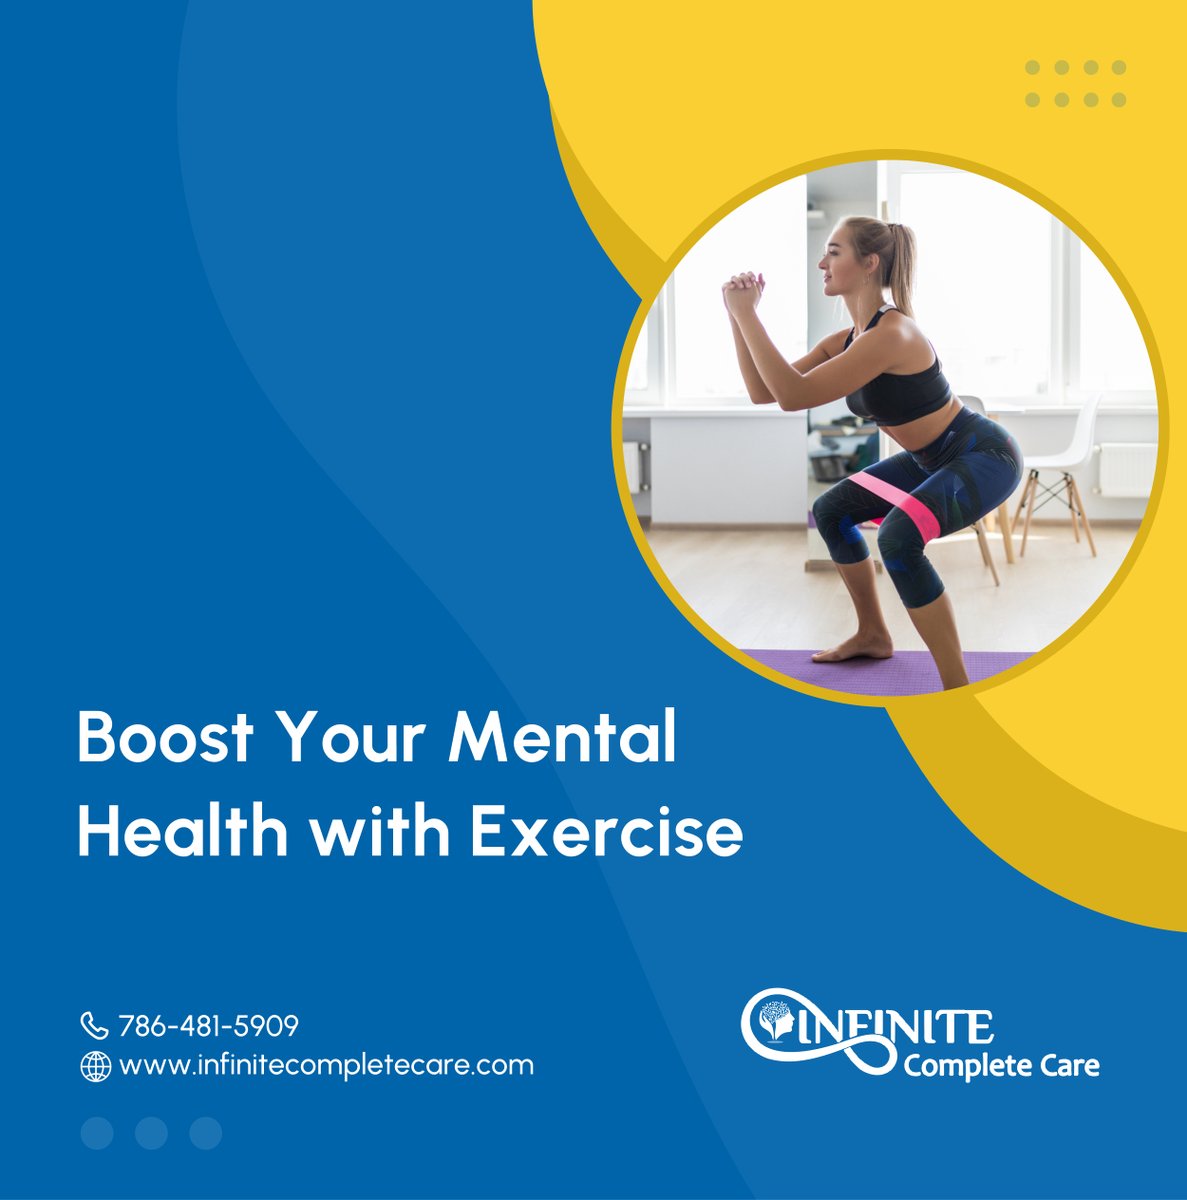 Incorporating regular exercise into your routine can have a significant impact on your mental health. Discover the benefits of different types of exercises and find what works best for you! Contact us today at tinyurl.com/2u6a6bzt. 

#ExerciseBenefits #WellnessJourney